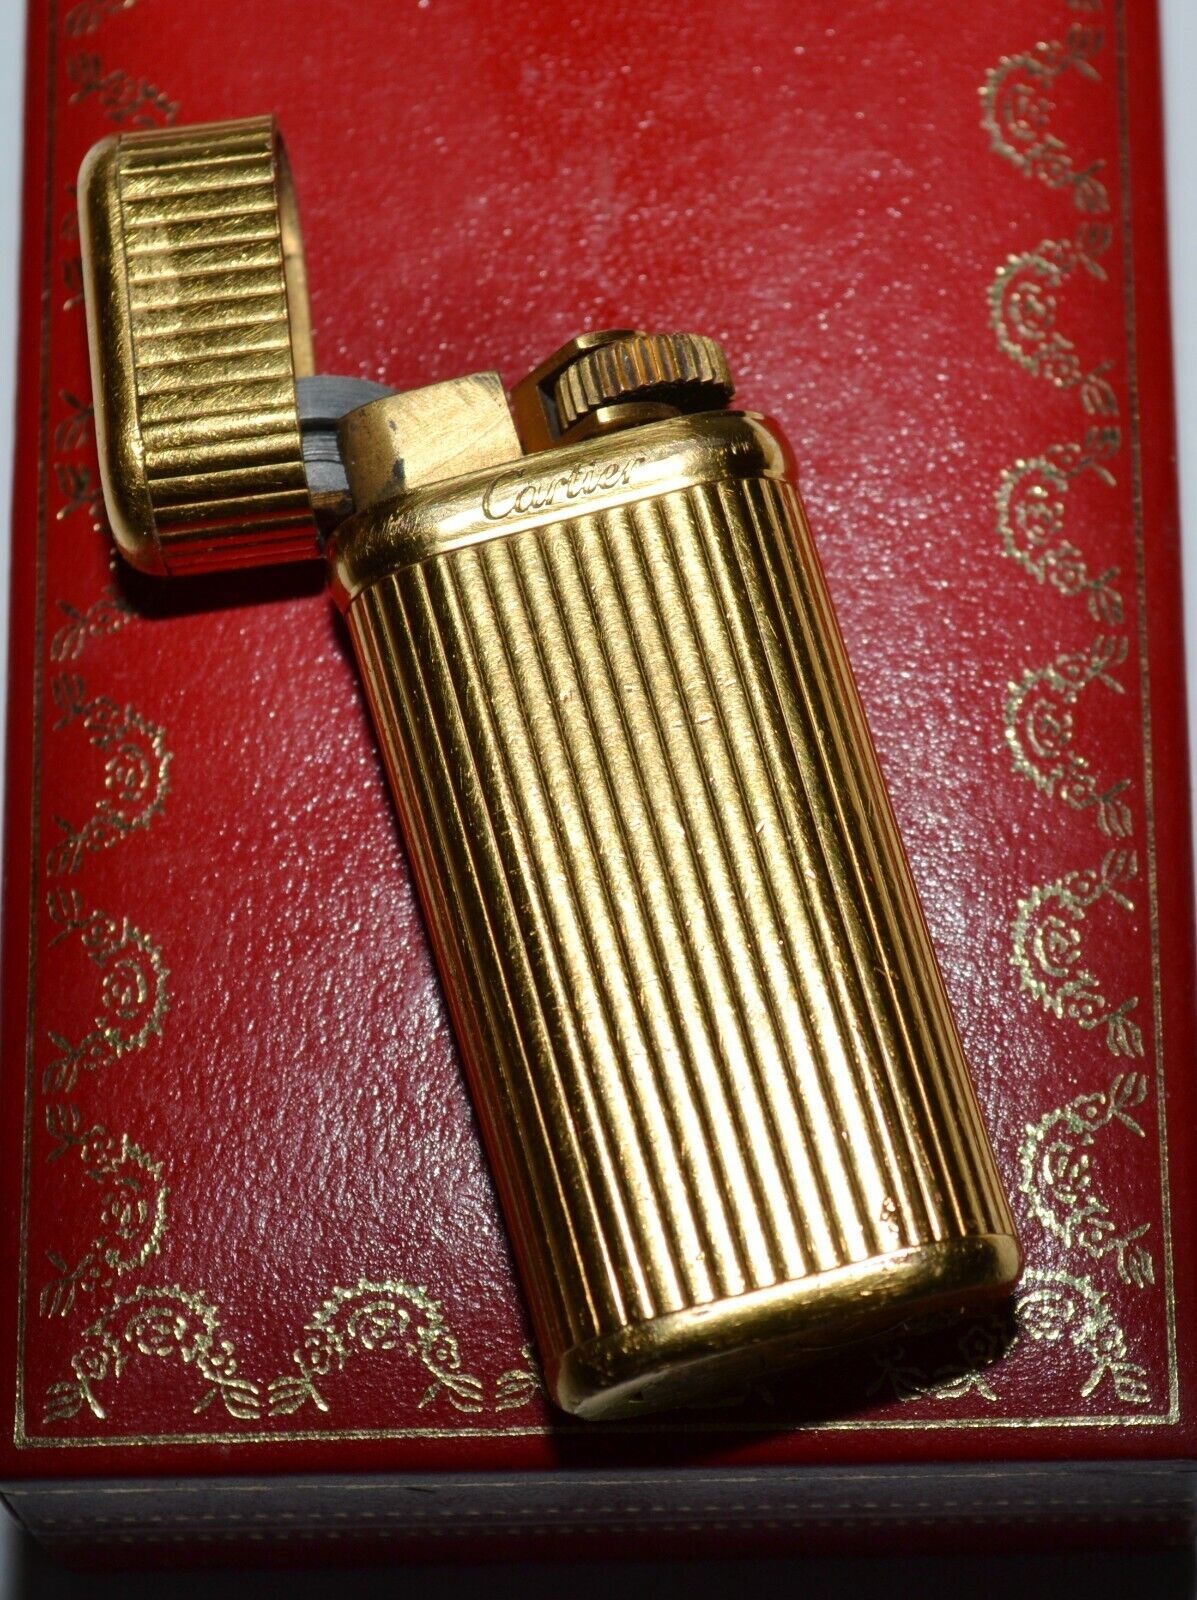 CARTIER LIGHTER GOLD PLATED SMALL OVAL LE MUST DE CARTIER FULLY WORKING VINTAGE